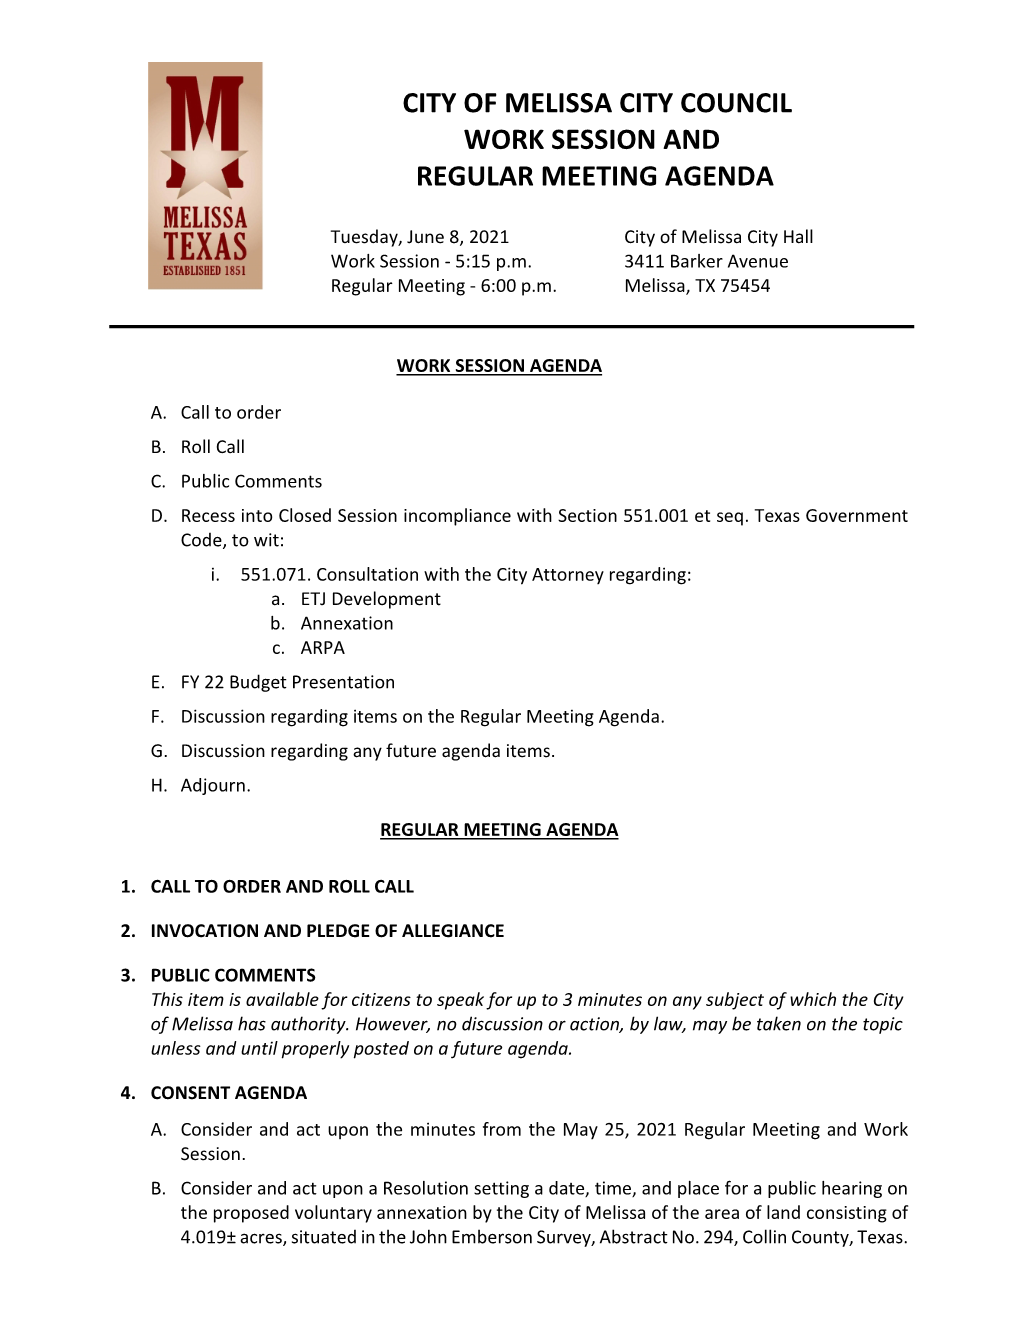 City Council Work Session and Regular Meeting Agenda